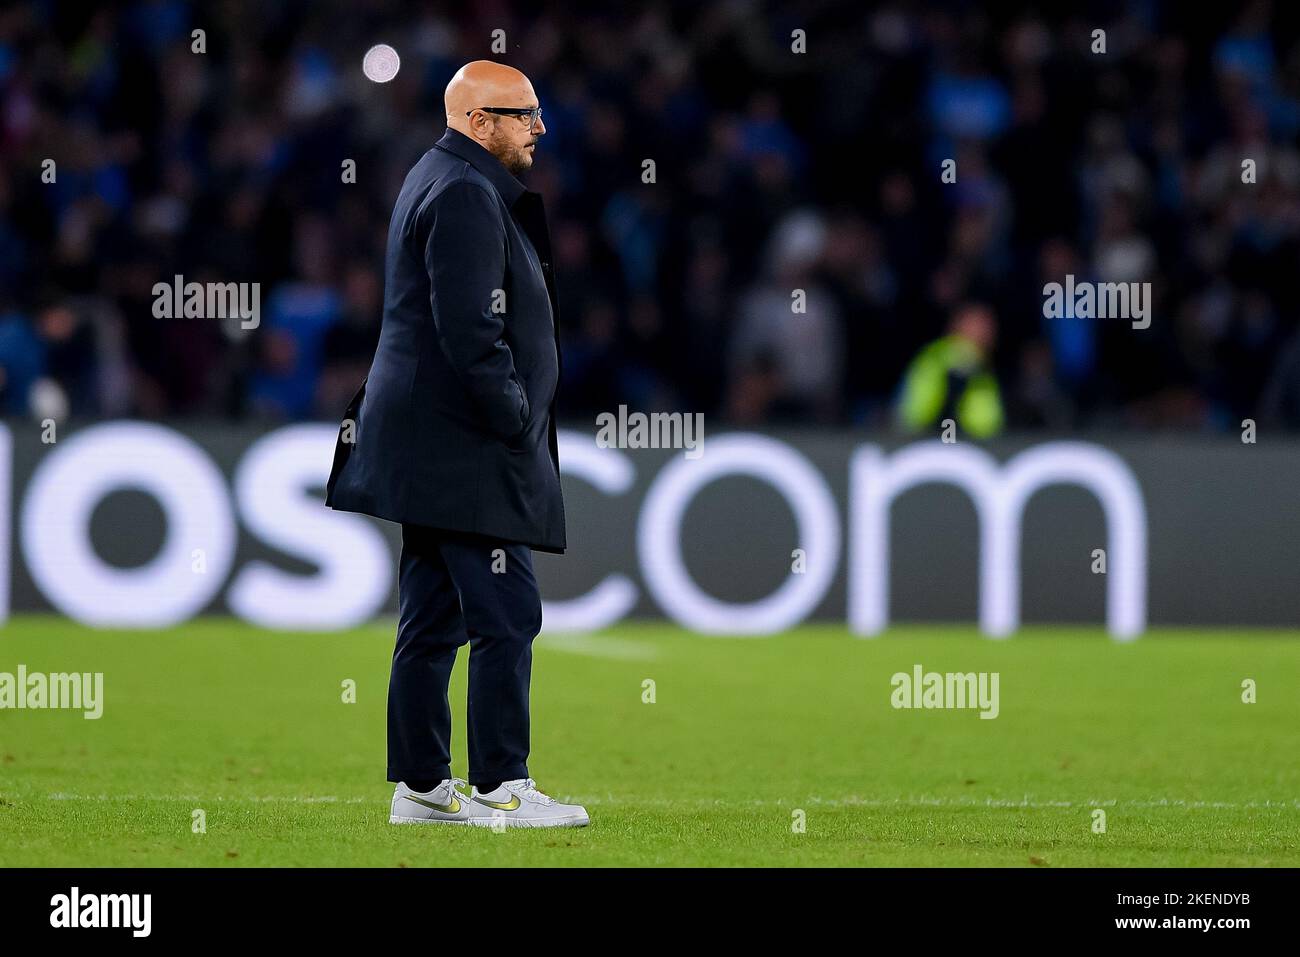 Naples, Italy. 12th Nov, 2022. Pierpaolo Marino sport director of Udinese Calcio during the Serie A match between Napoli and Udinese at Stadio Diego Armando Maradona, Naples, Italy on 12 November 2022. Credit: Giuseppe Maffia/Alamy Live News Stock Photo